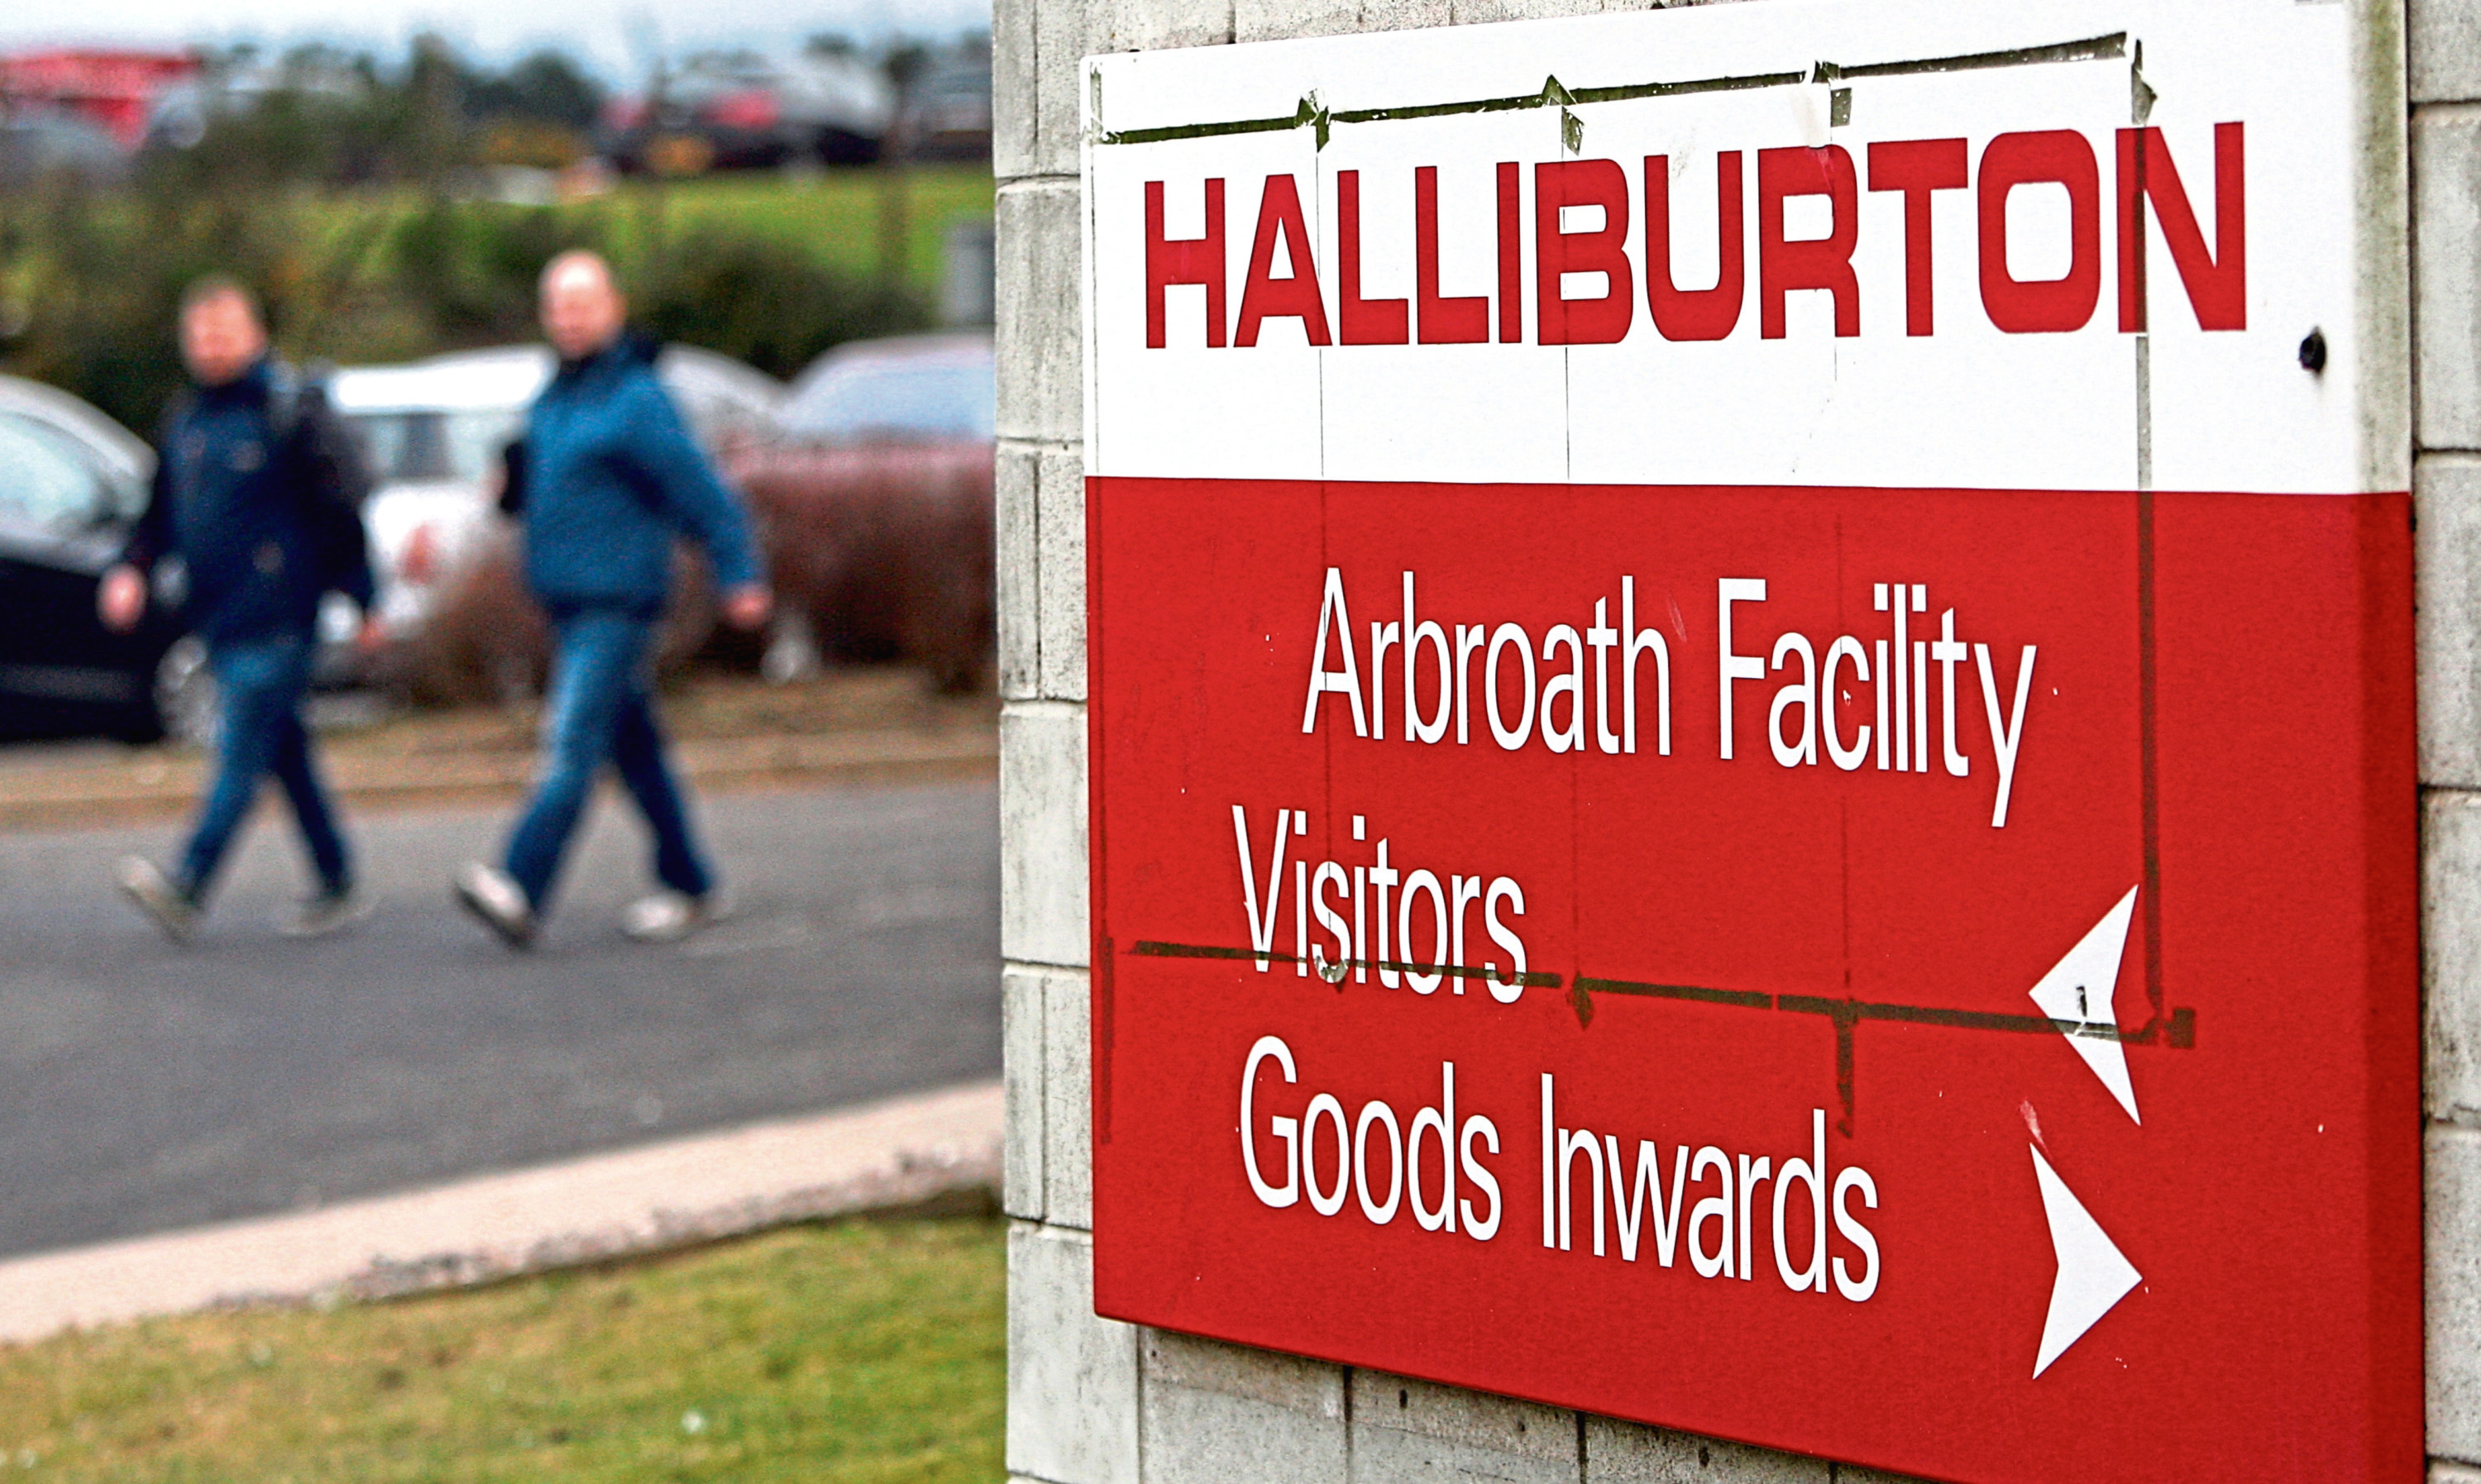 The entrance to the Halliburton site in Arbroath. Picture: Kris Miller.